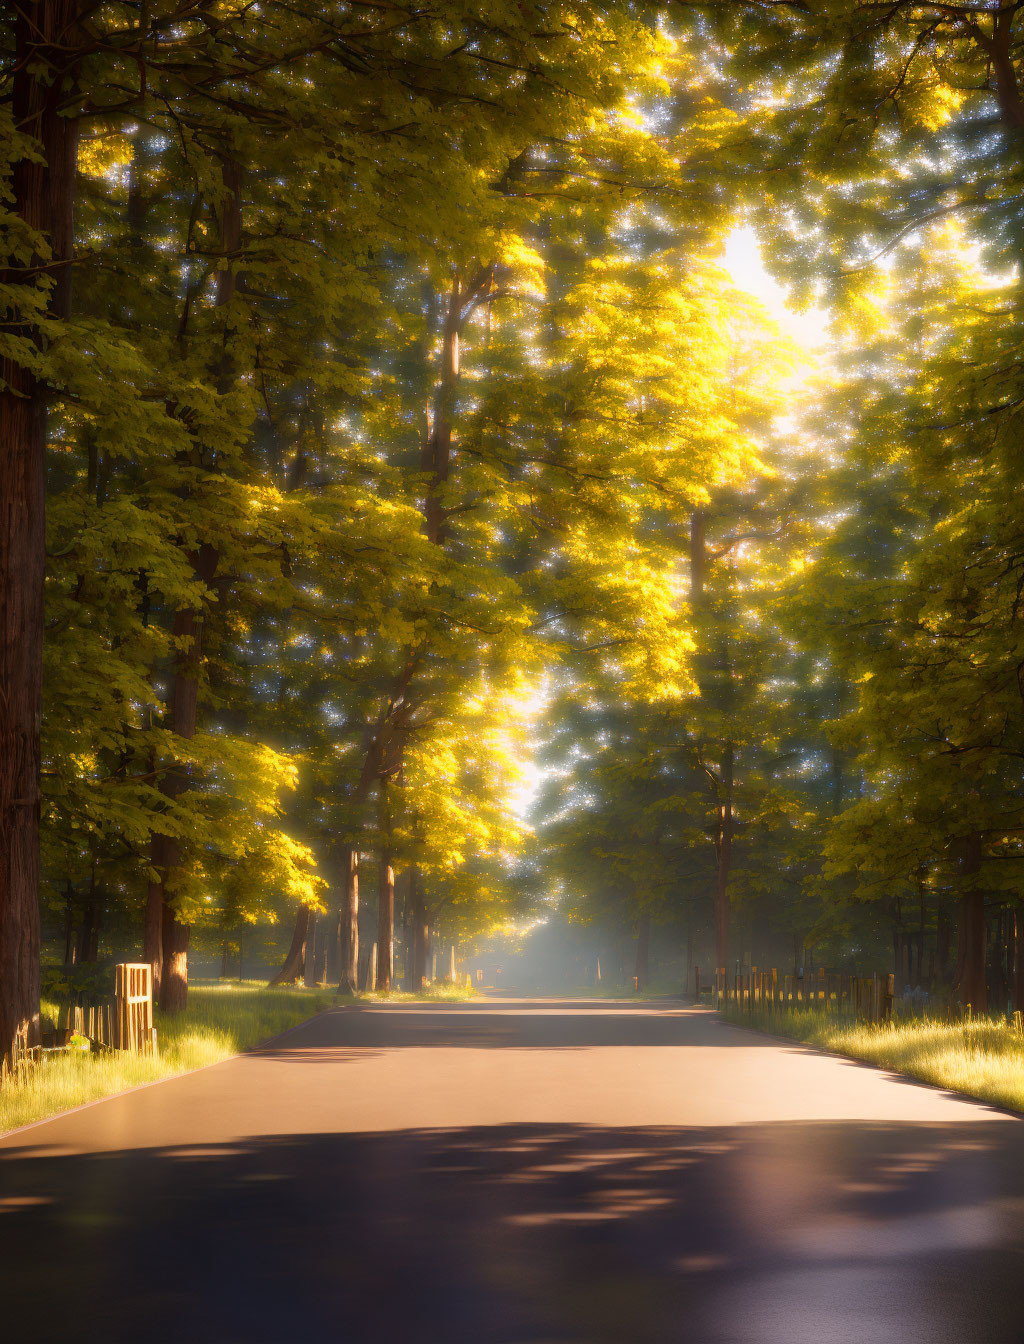 Sunlit forest road with tall trees and long shadows